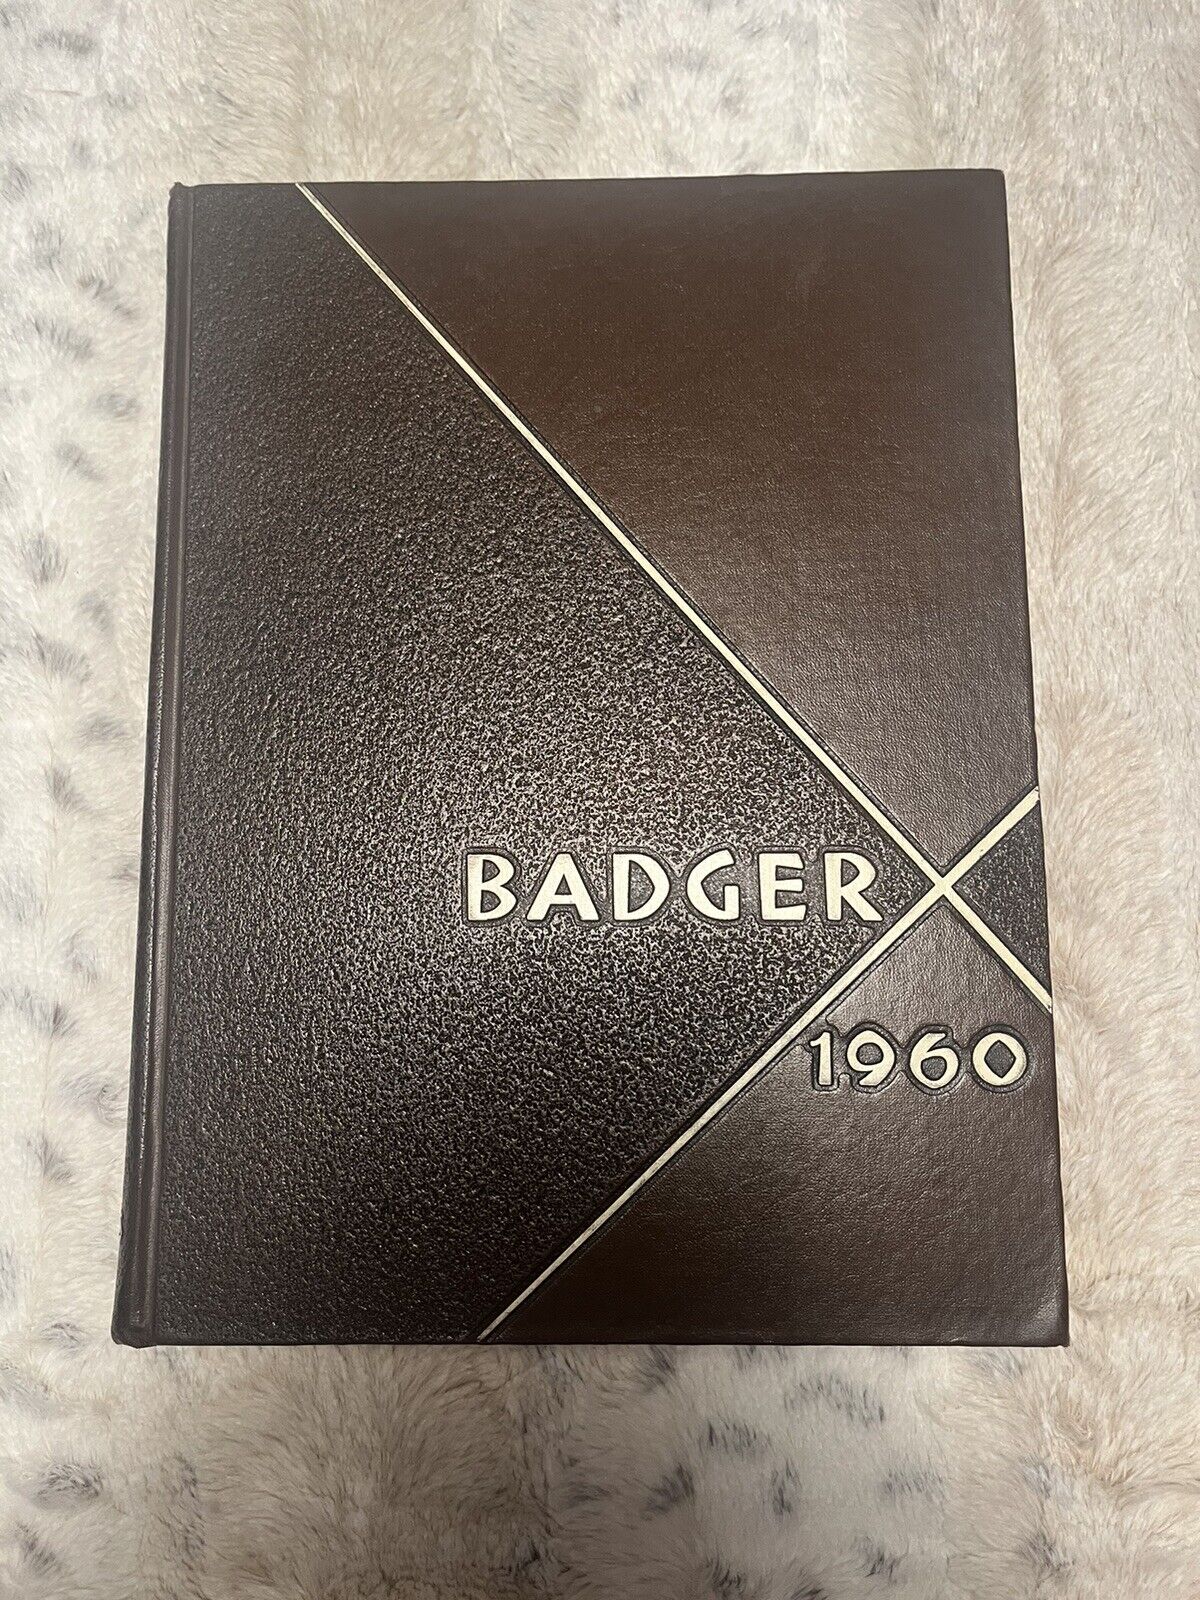 University of Wisconsin Madison Badger 1960 Yearbook College Annual Vol. 75 Book